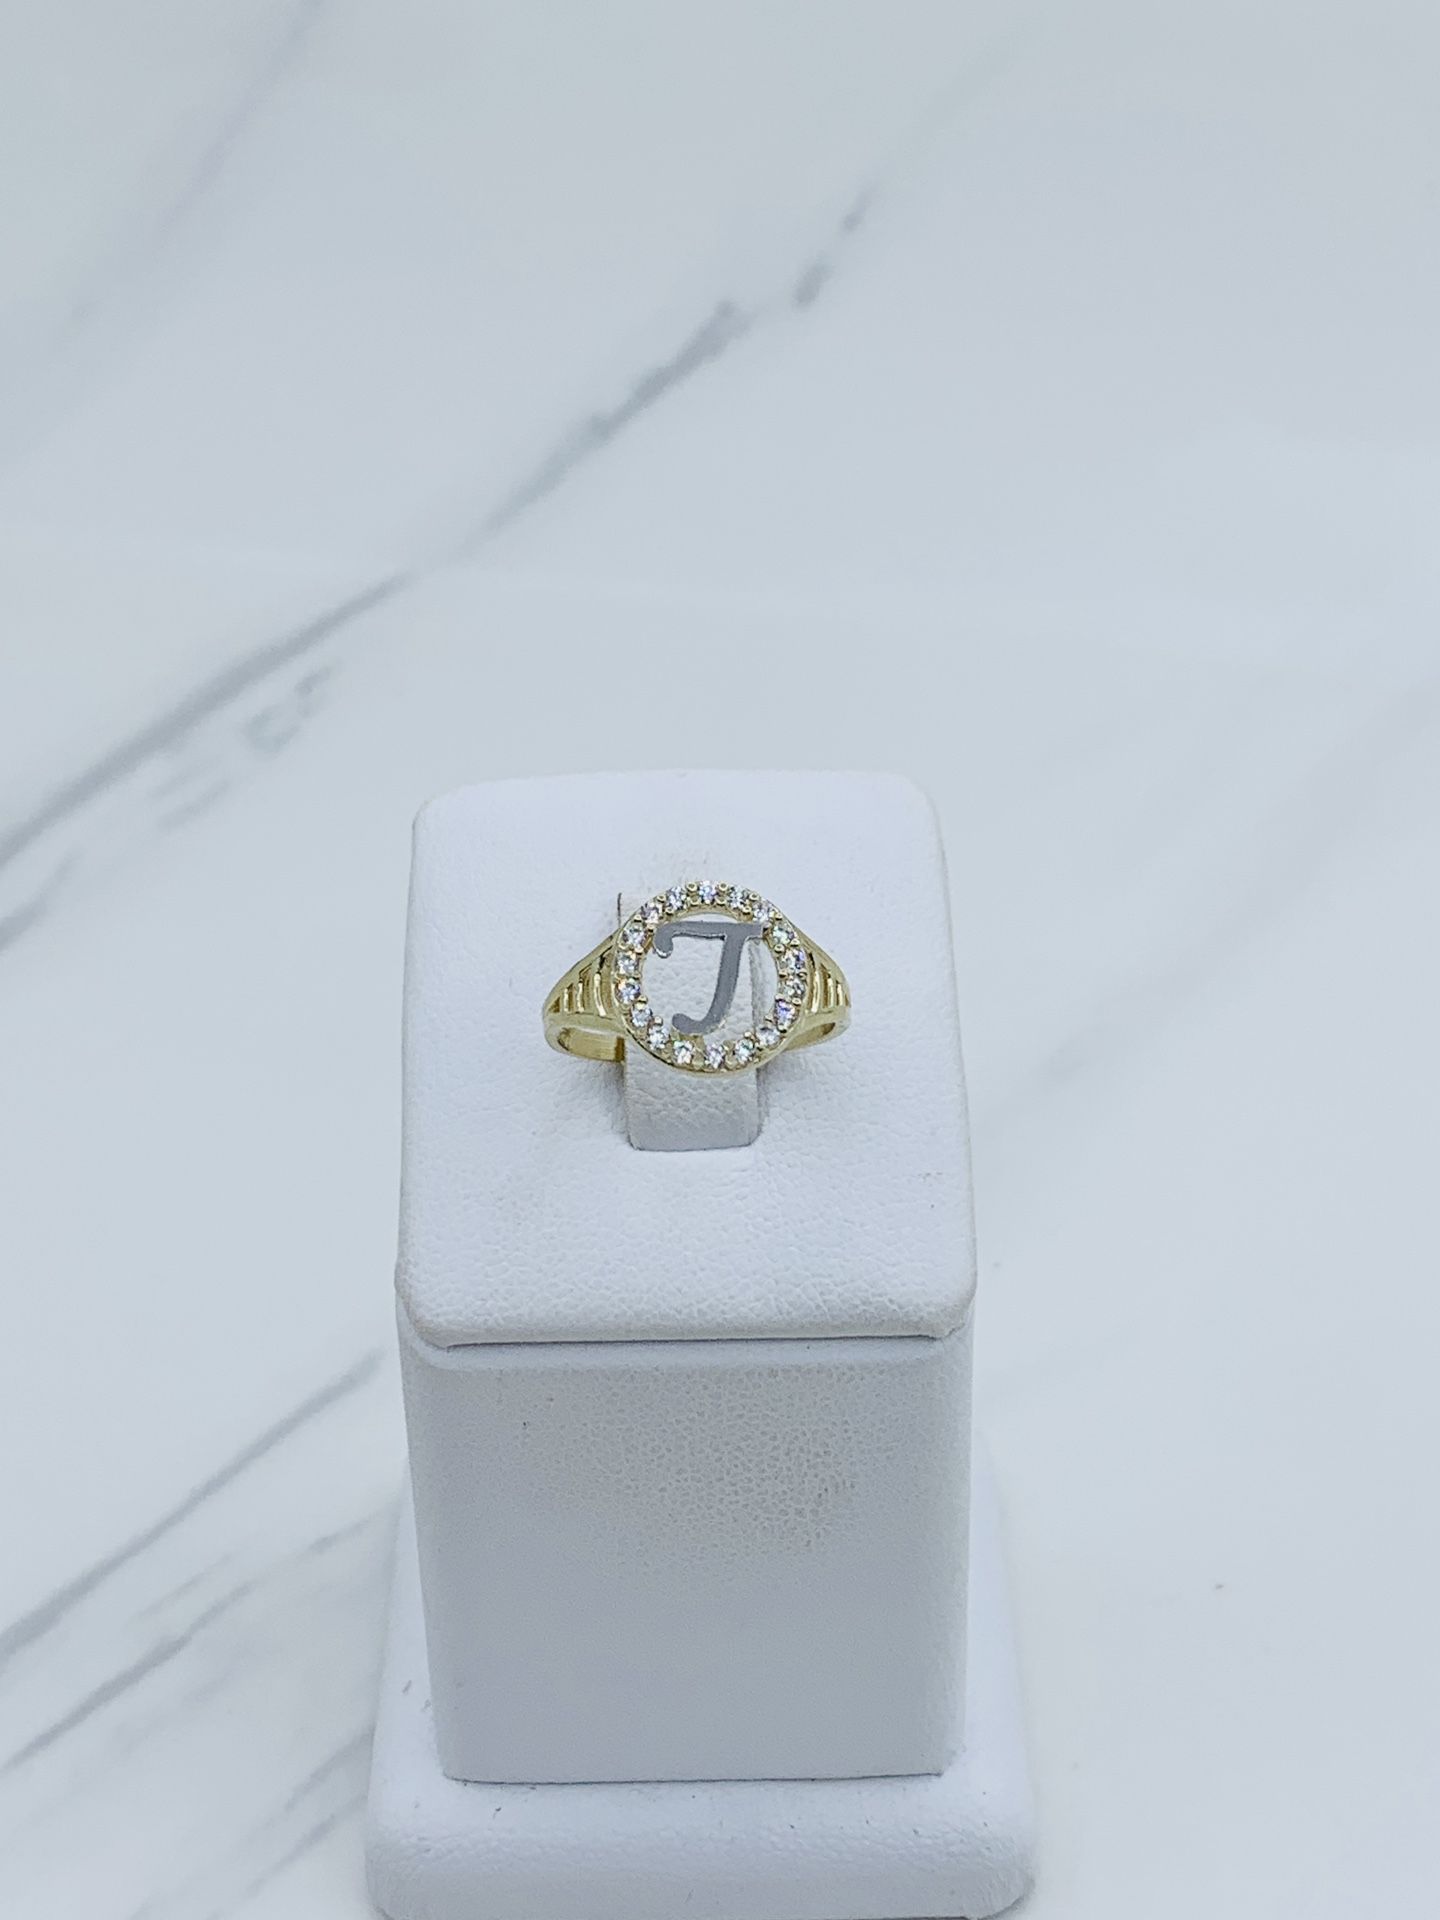 ❤️ Real 10k Gold Ring Initial T Circle   ❤️ Size 7  ❤️ Anillo Inicial En Oro